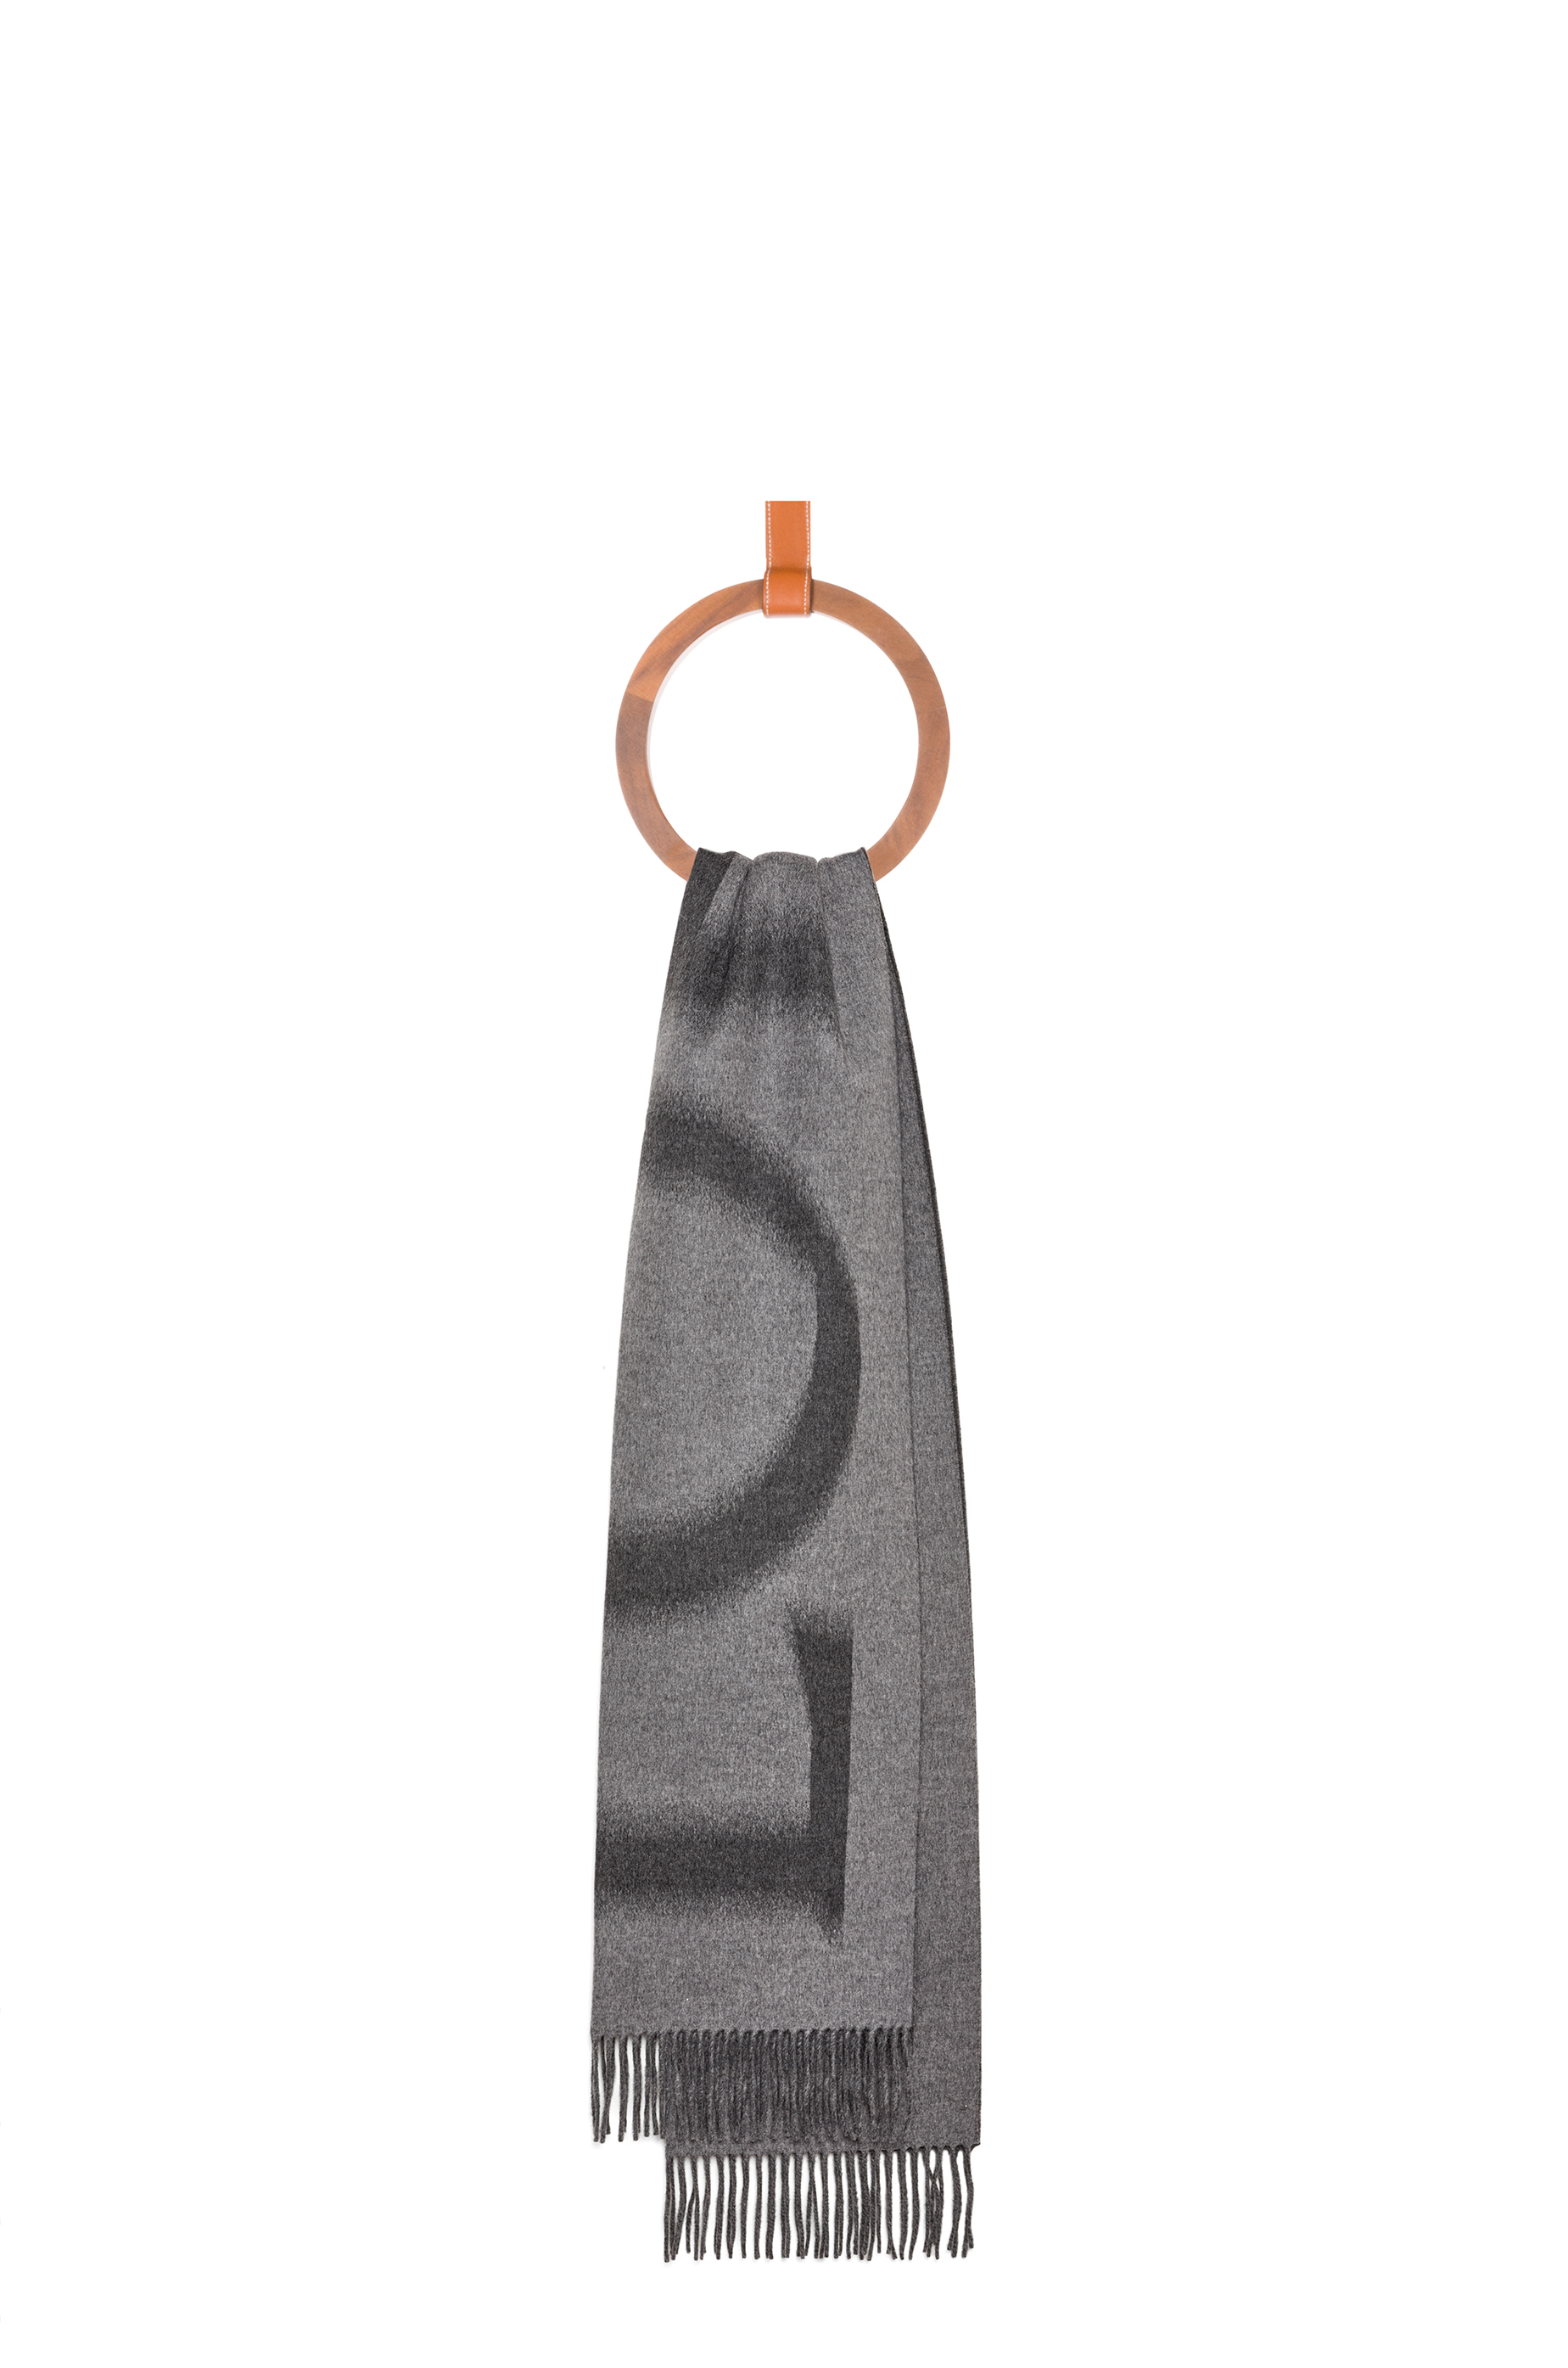 Loewe Women's Wool and Cashmere Scarf